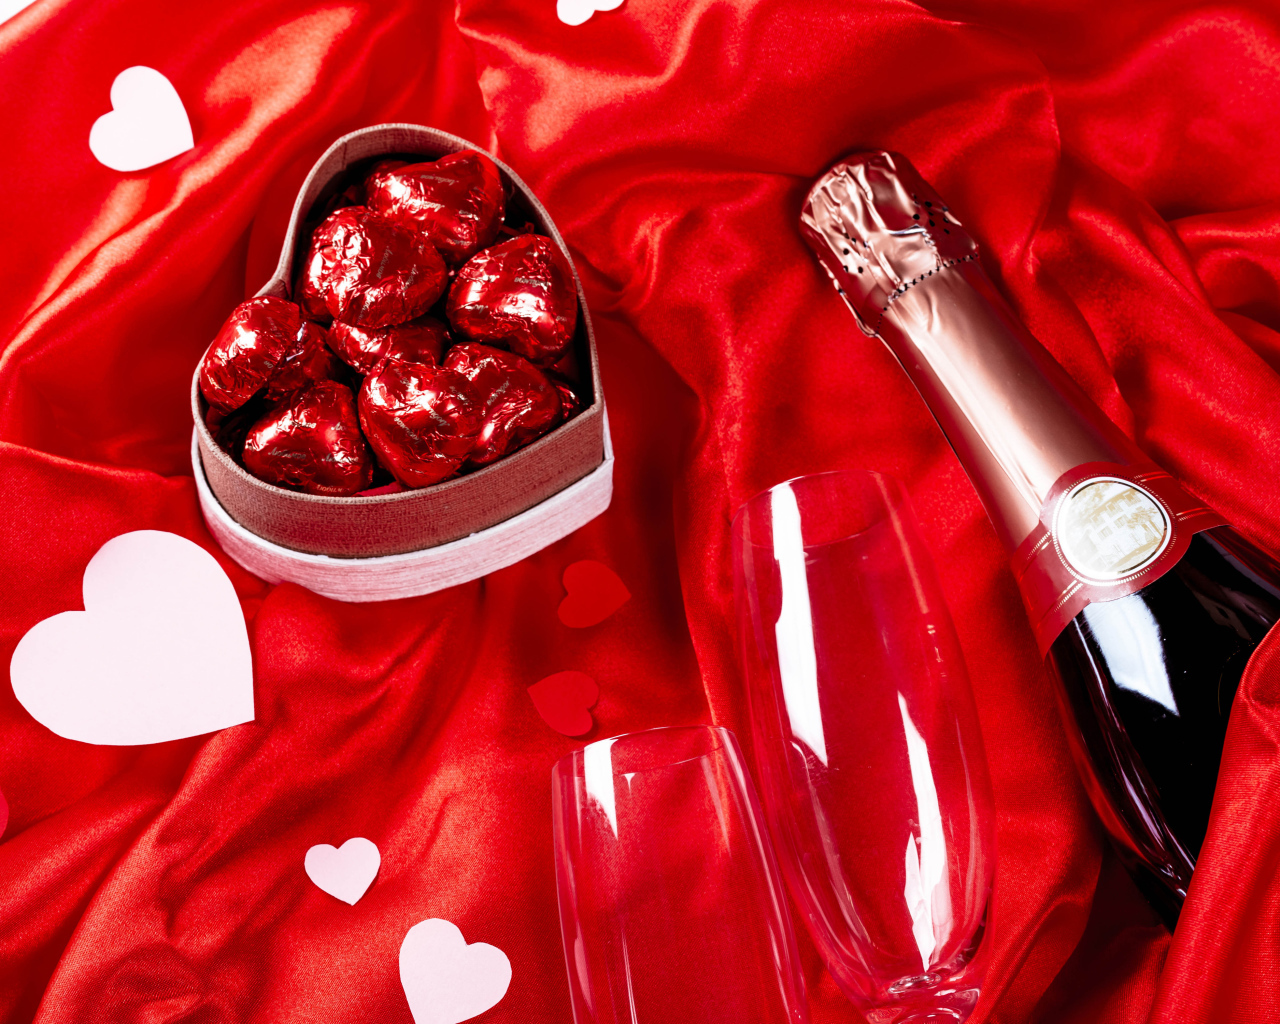 A bottle of champagne and a gift for your beloved on Valentine's Day